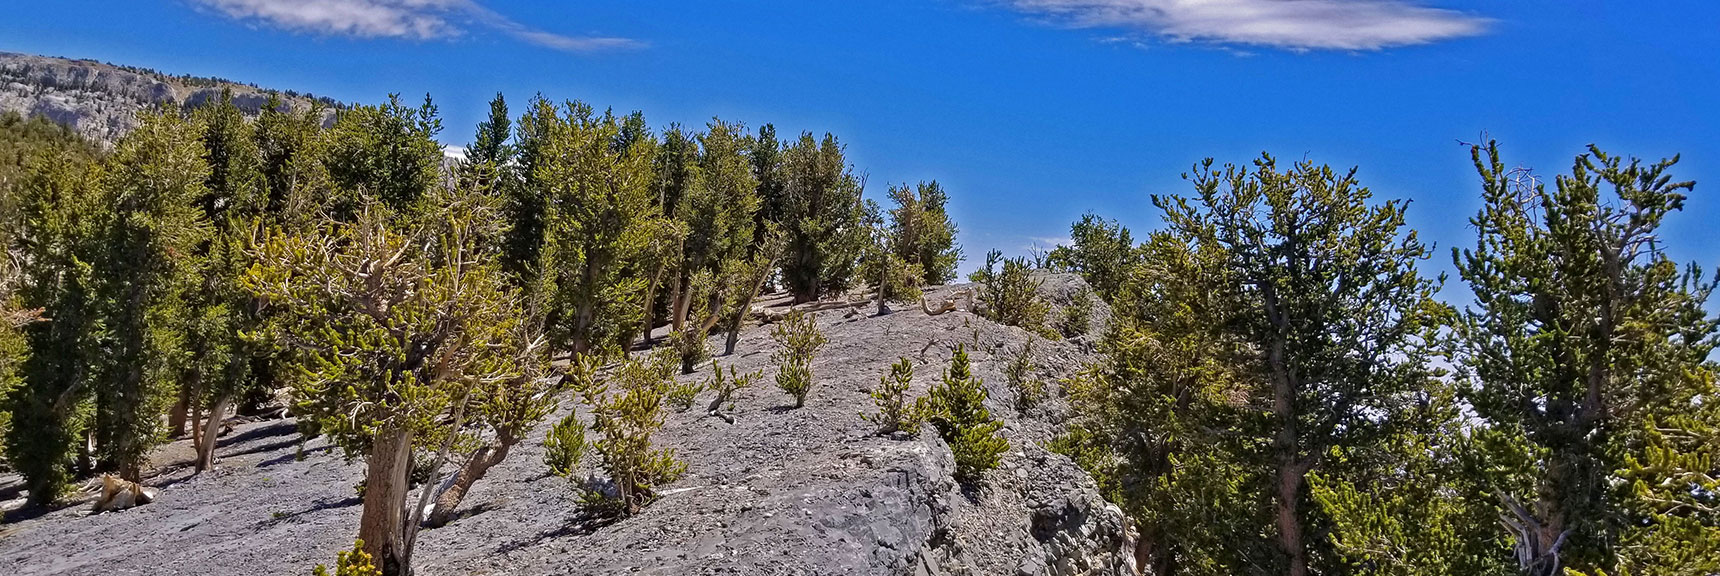 Sheer Cliff Over Right (South) Edge of Limestone High Point | Lee to Kyle Canyon | Foxtail Approach | Mt Charleston Wilderness | Spring Mountains, Nevada